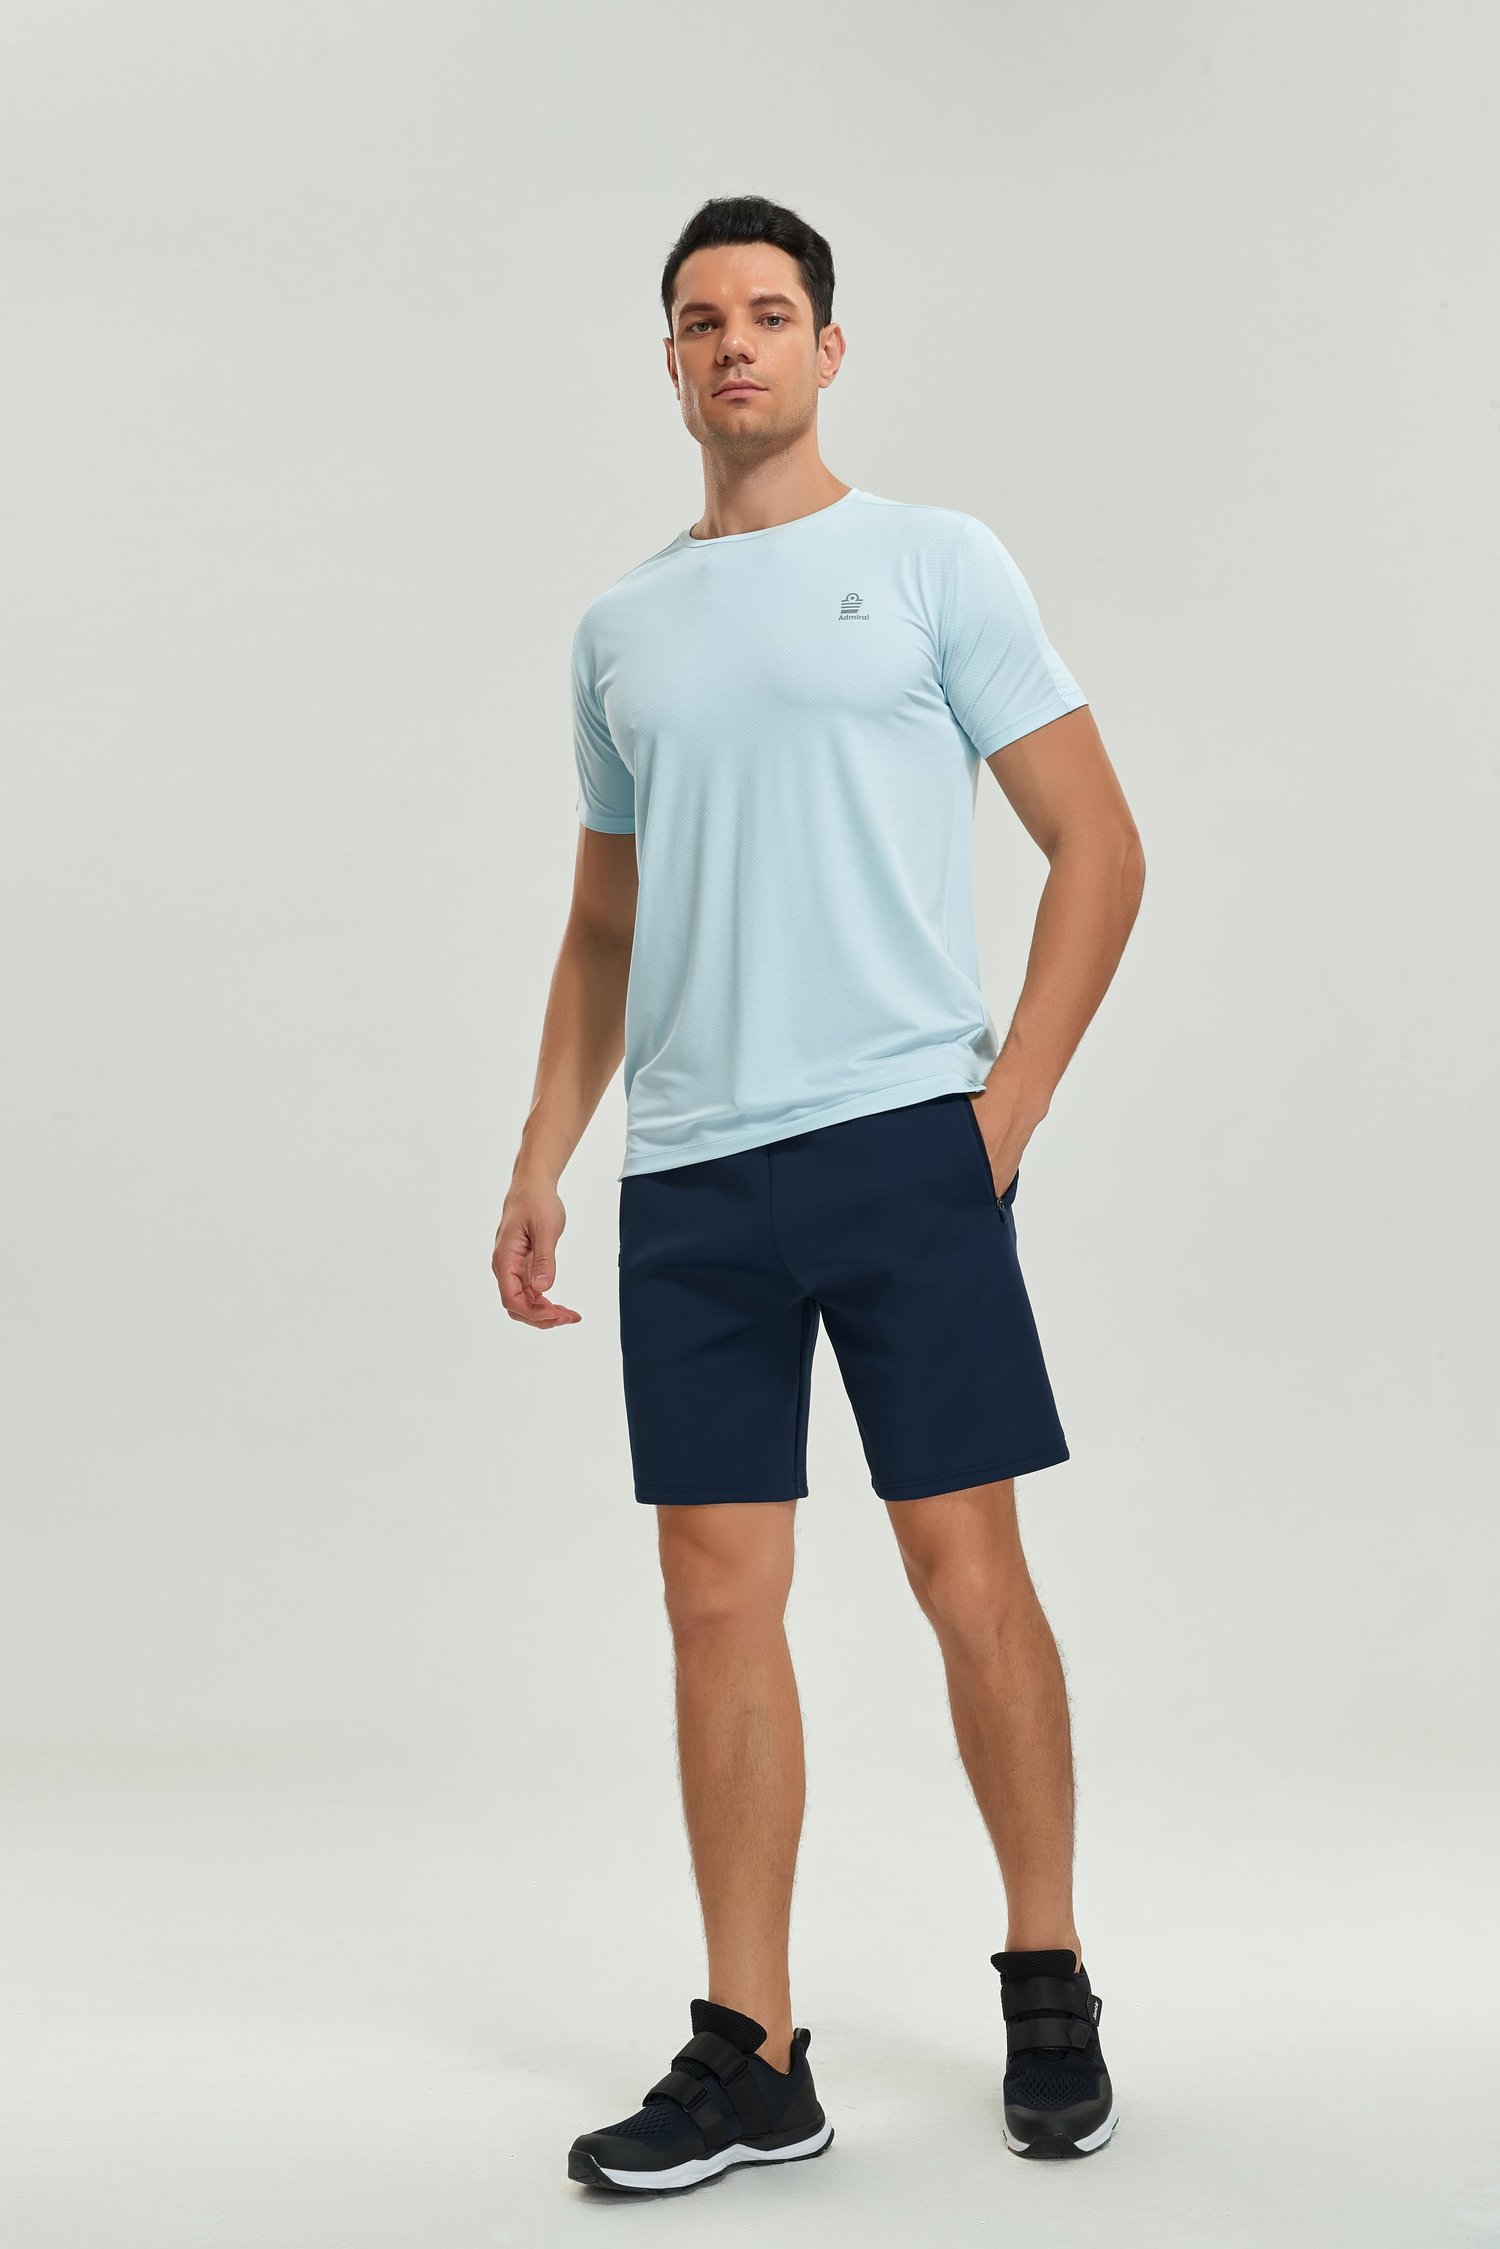 Men's Activewear Sets with Shorts